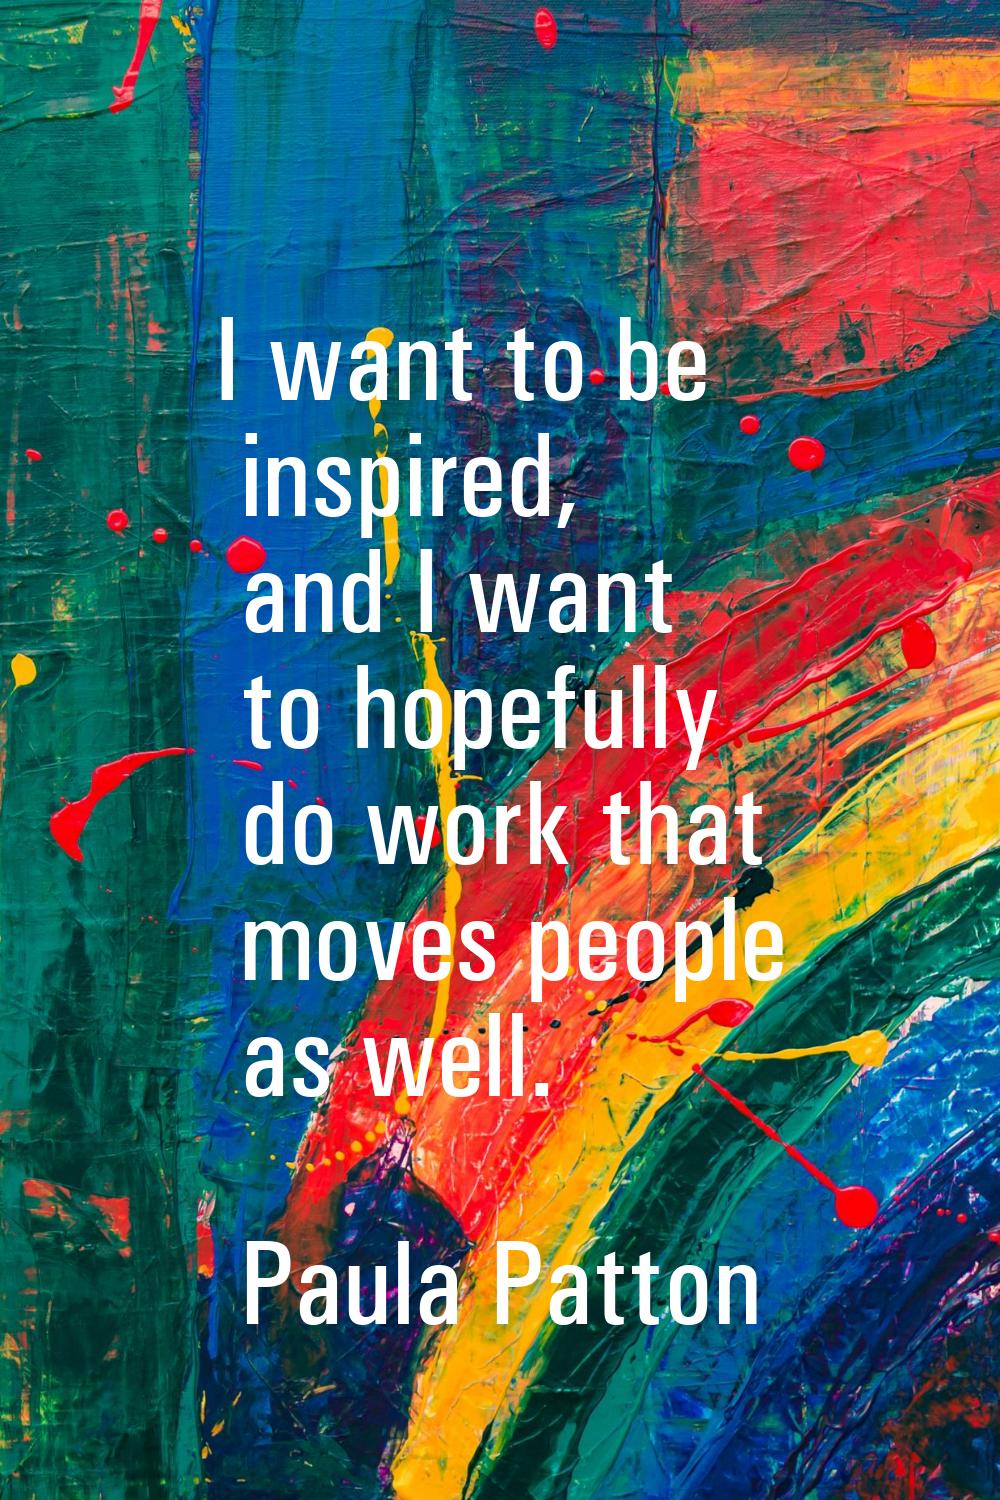 I want to be inspired, and I want to hopefully do work that moves people as well.